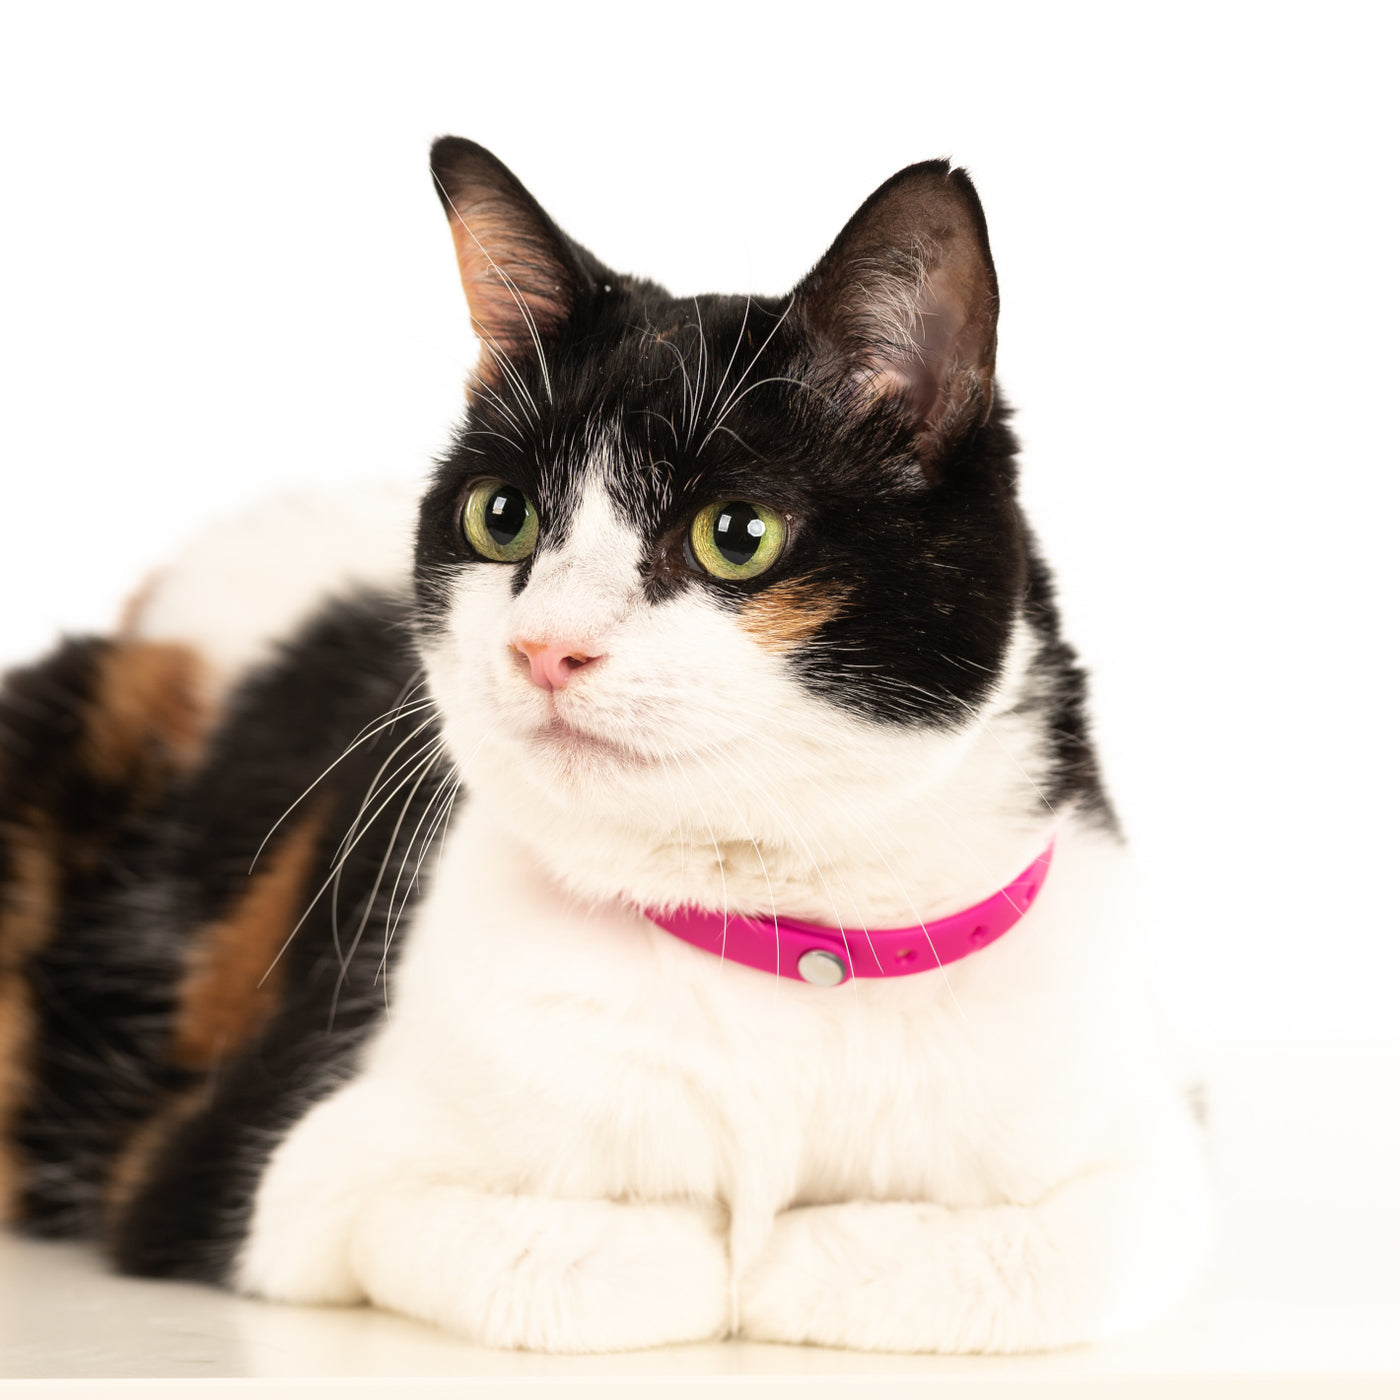 Mixed breed cat wearing pink collar